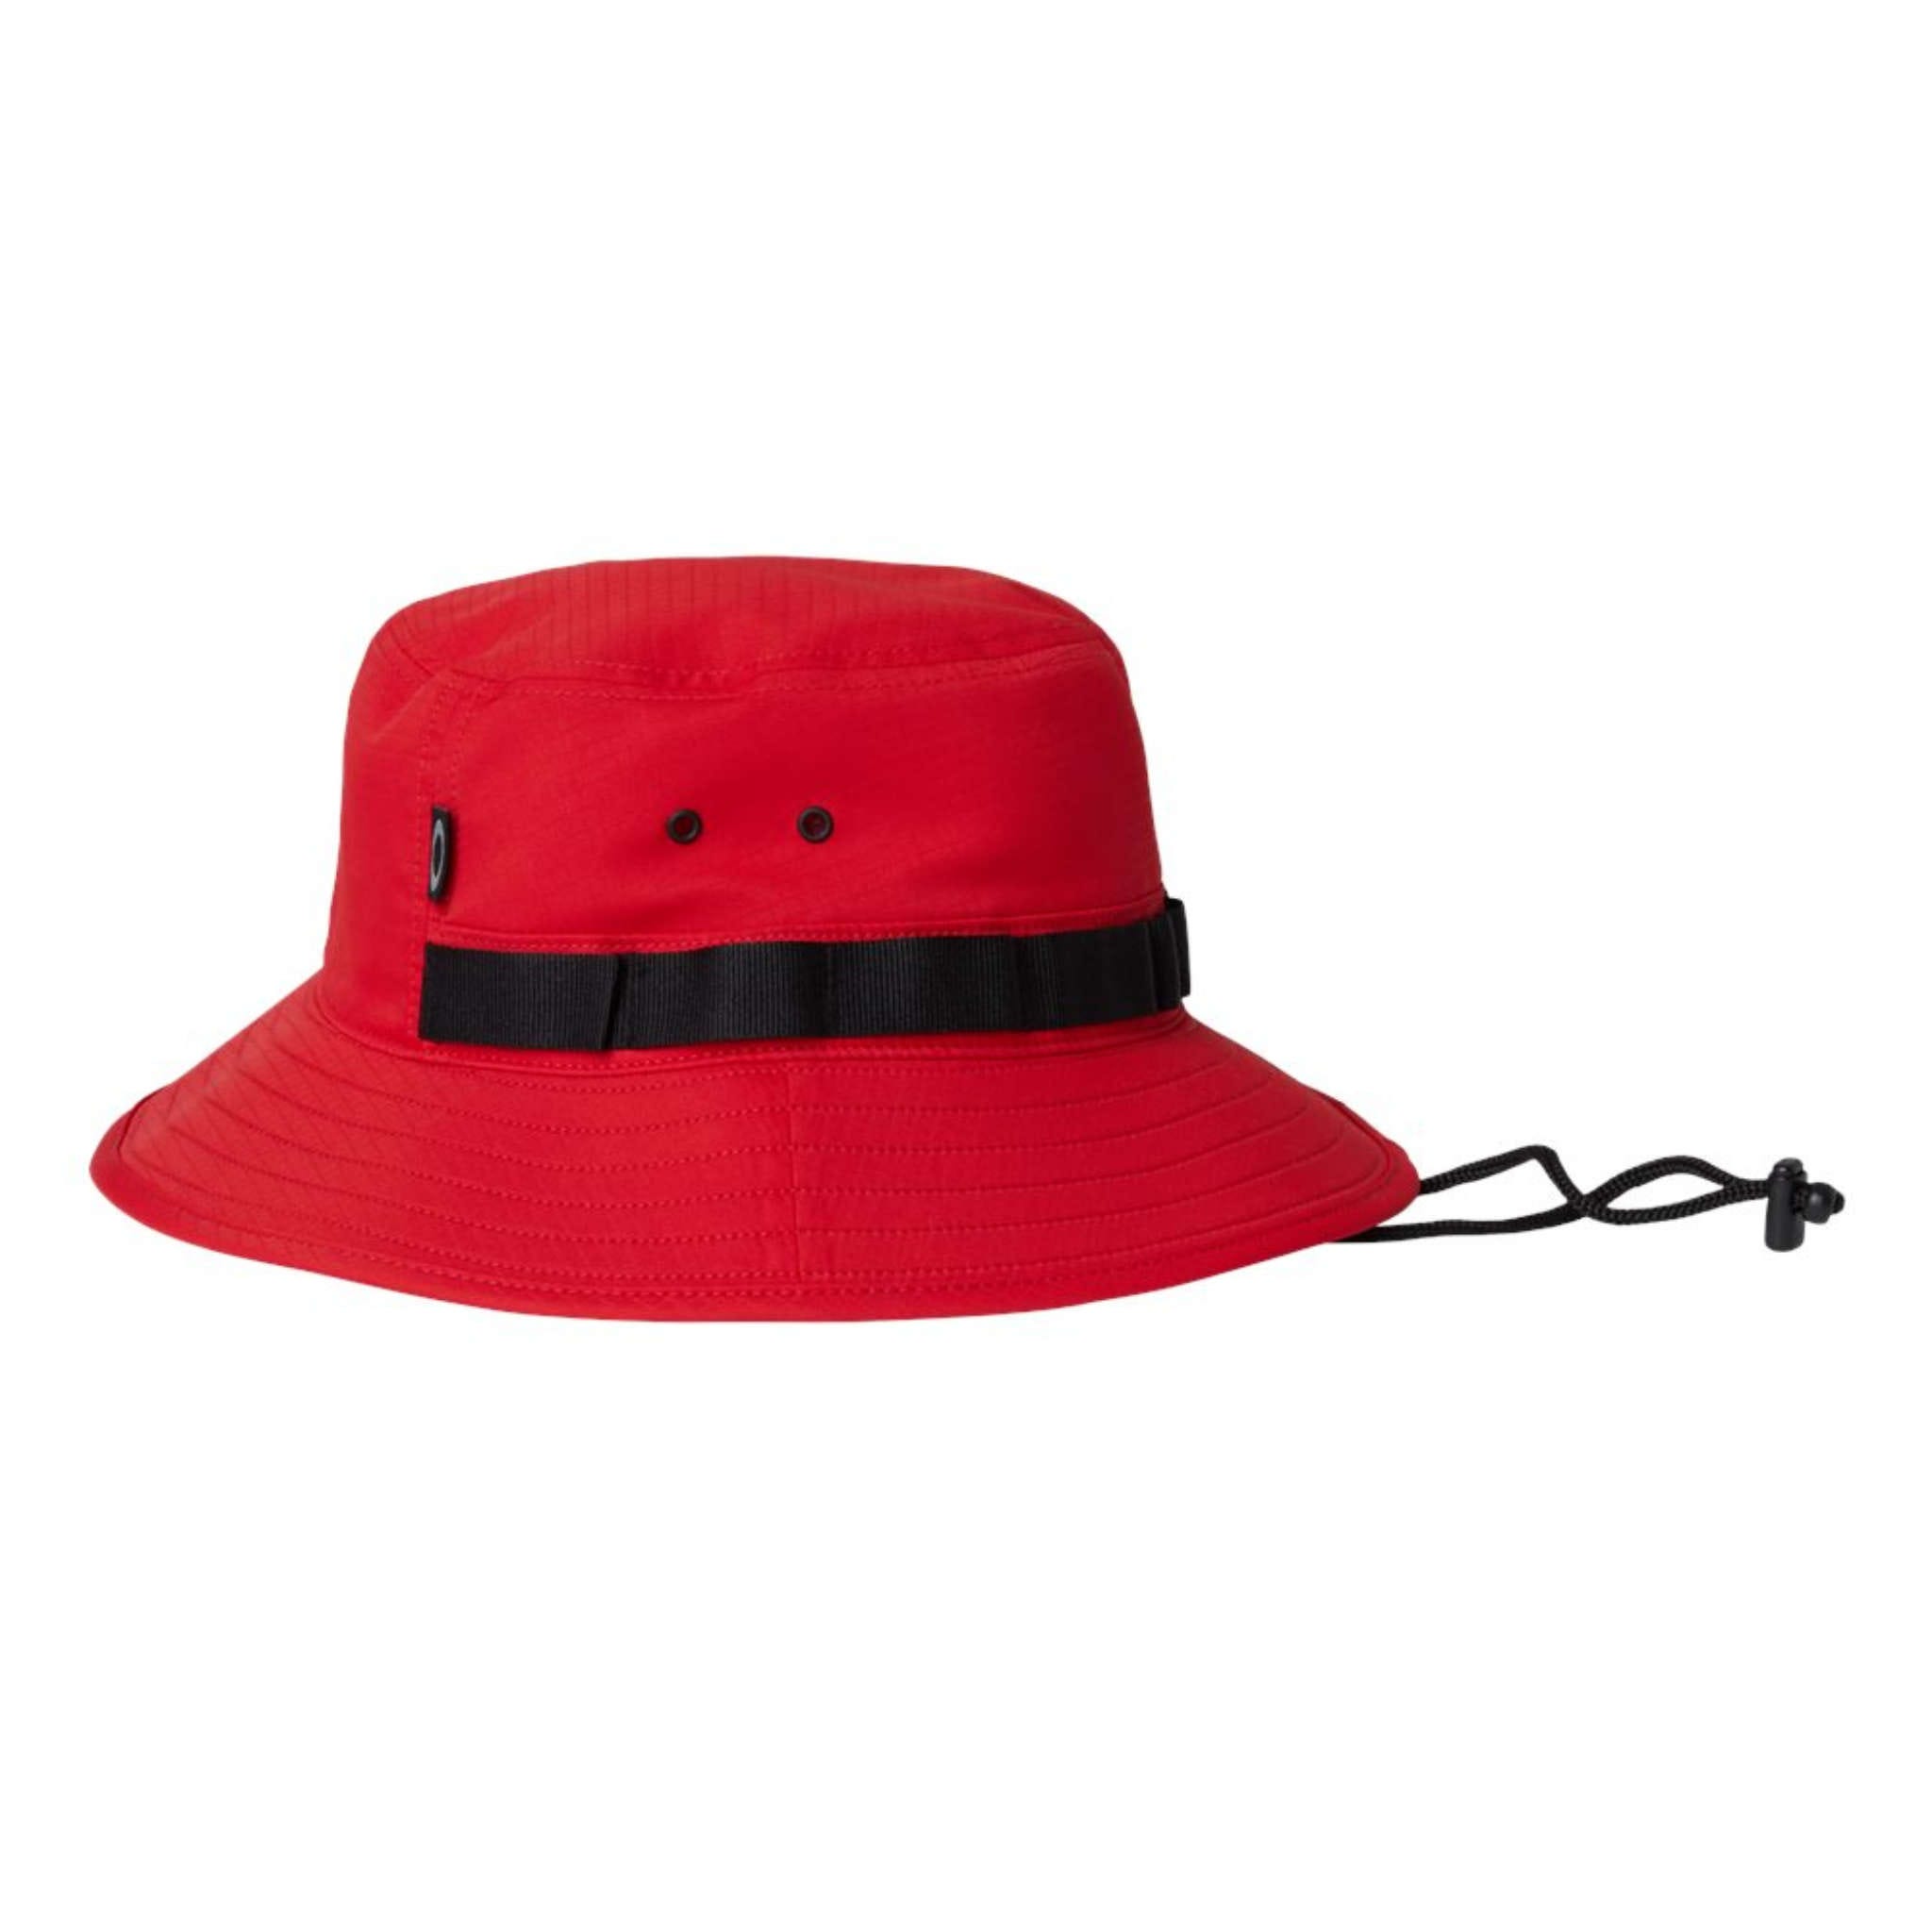 Funny 80th Birthday: It Took Me 80 Years To Look This Good Oakley - Bucket Hat